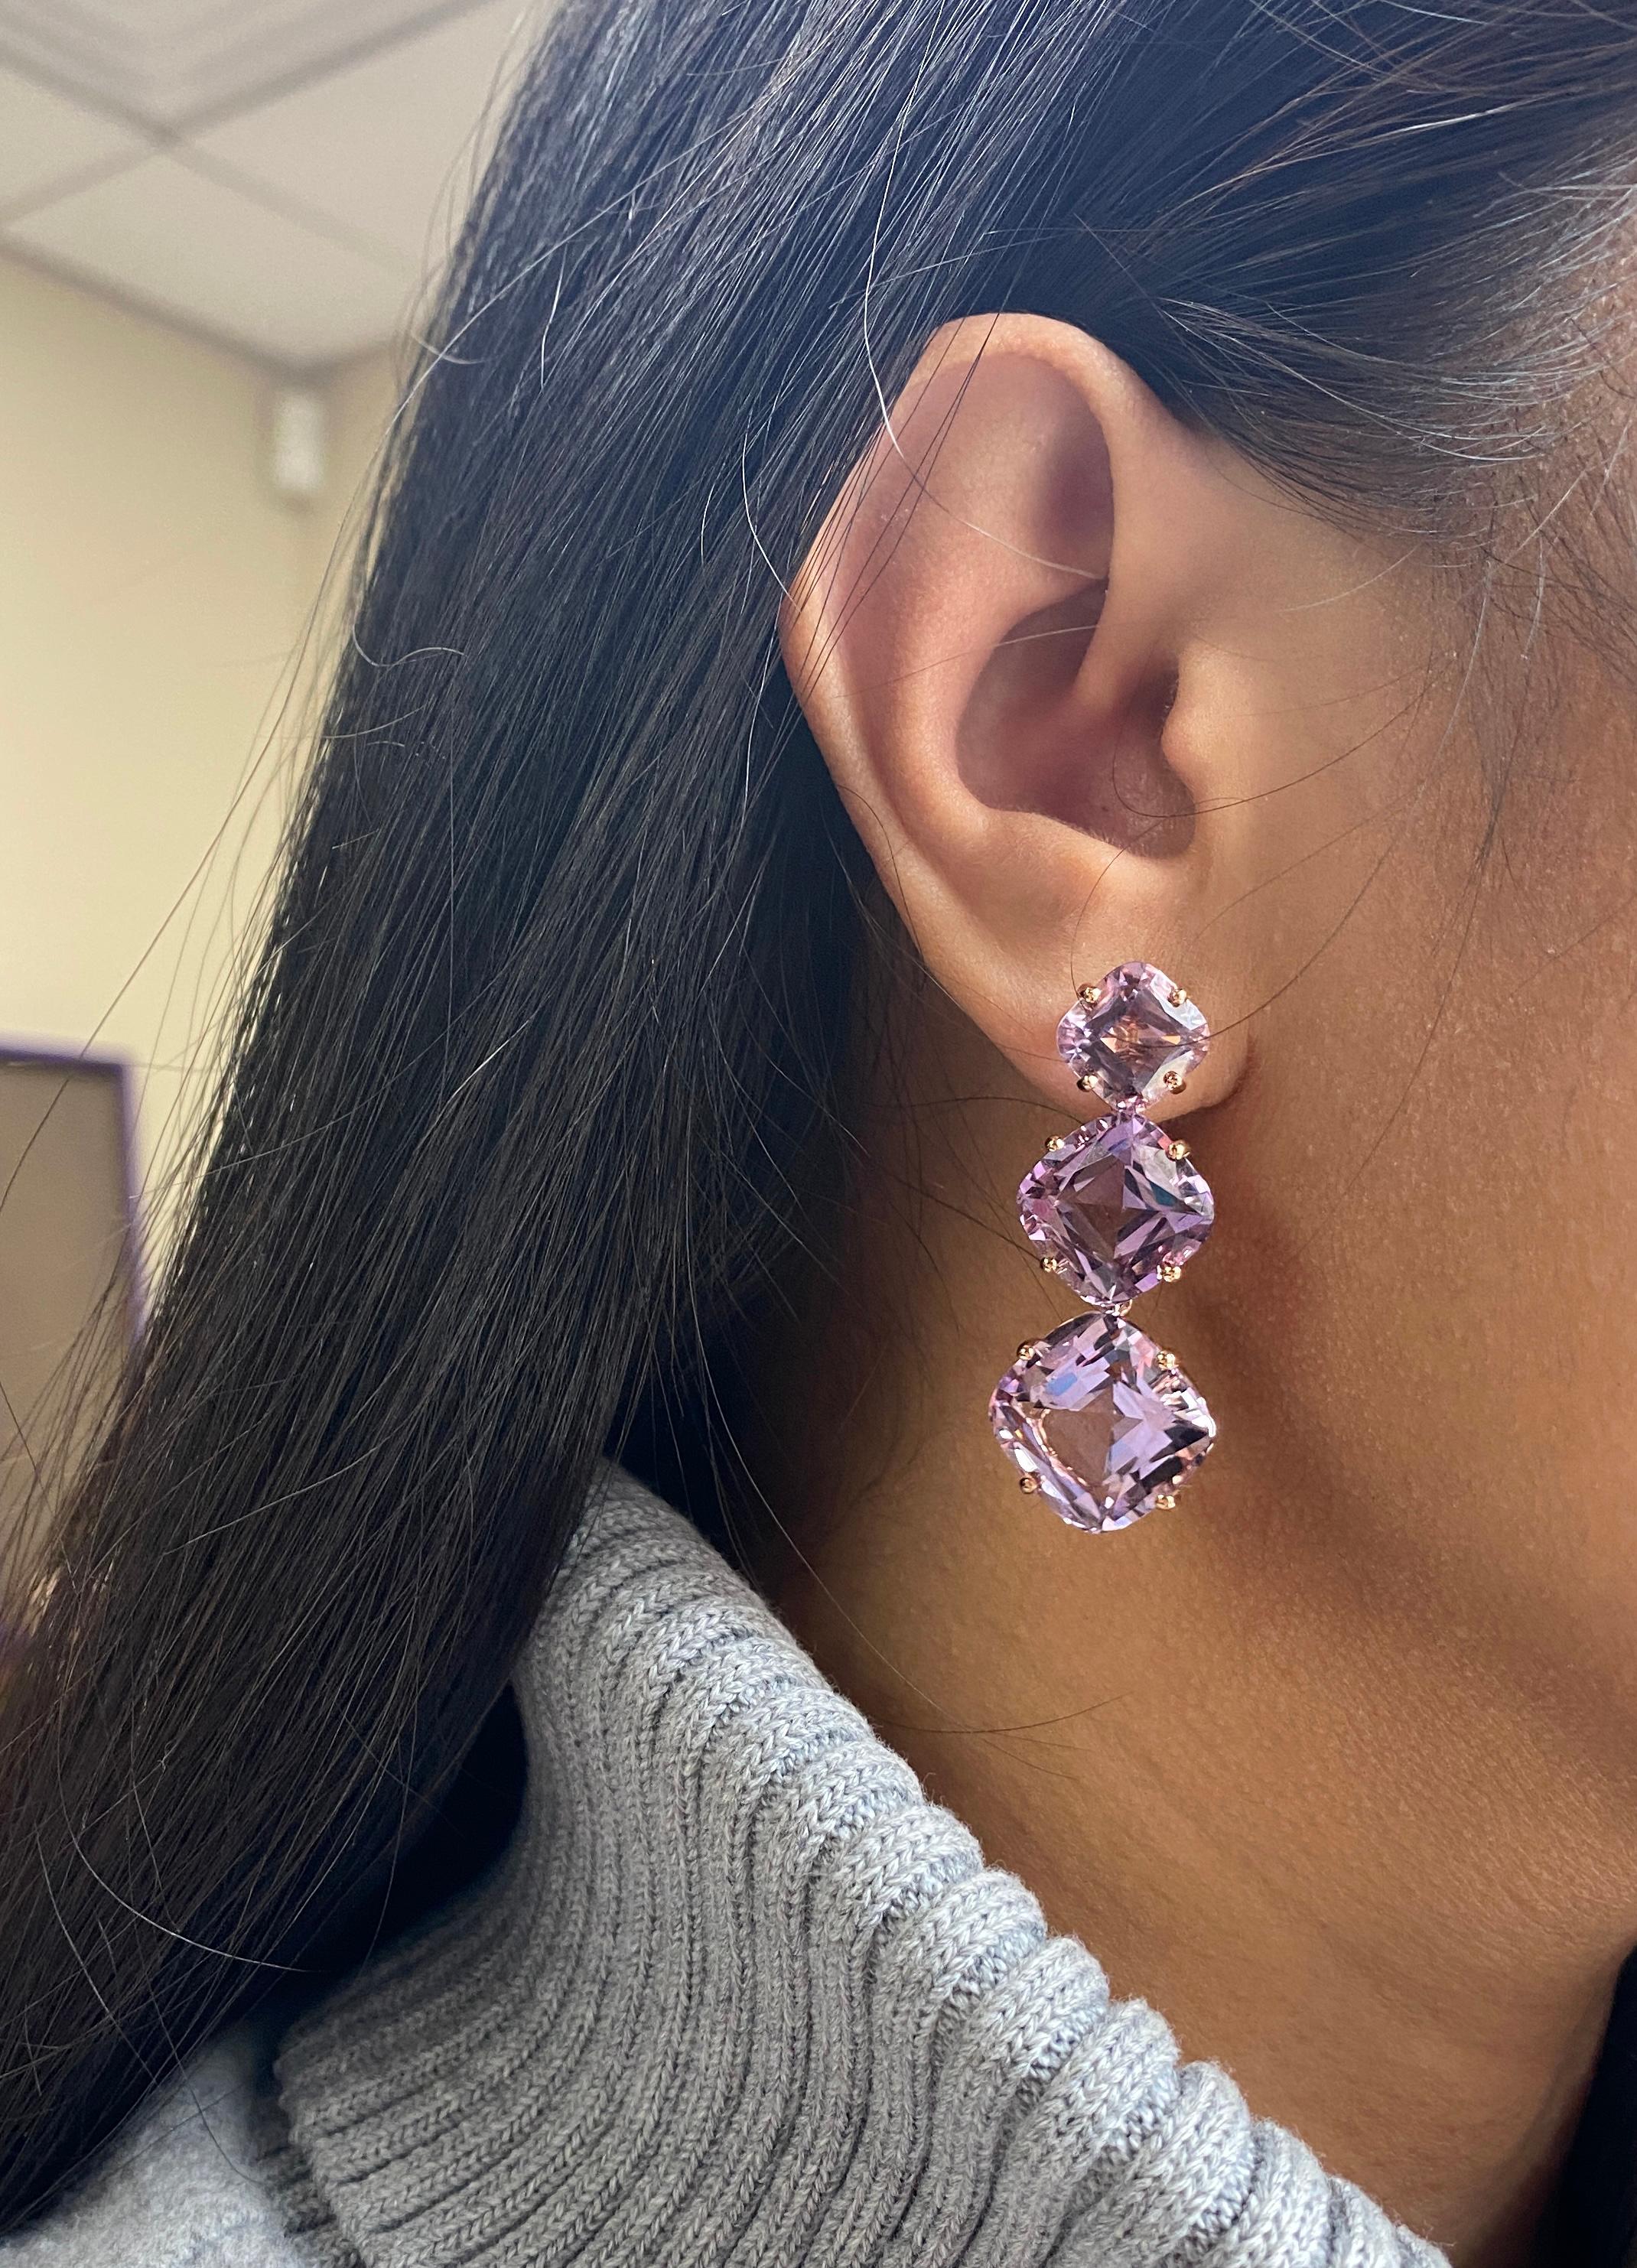 Introducing the exquisite 3 Tier Lavender Amethyst Cushion Earrings from the captivating 'Gossip' Collection. Crafted in luxurious 18K rose gold, these earrings are a true testament to elegance and sophistication. Each tier showcases a mesmerizing